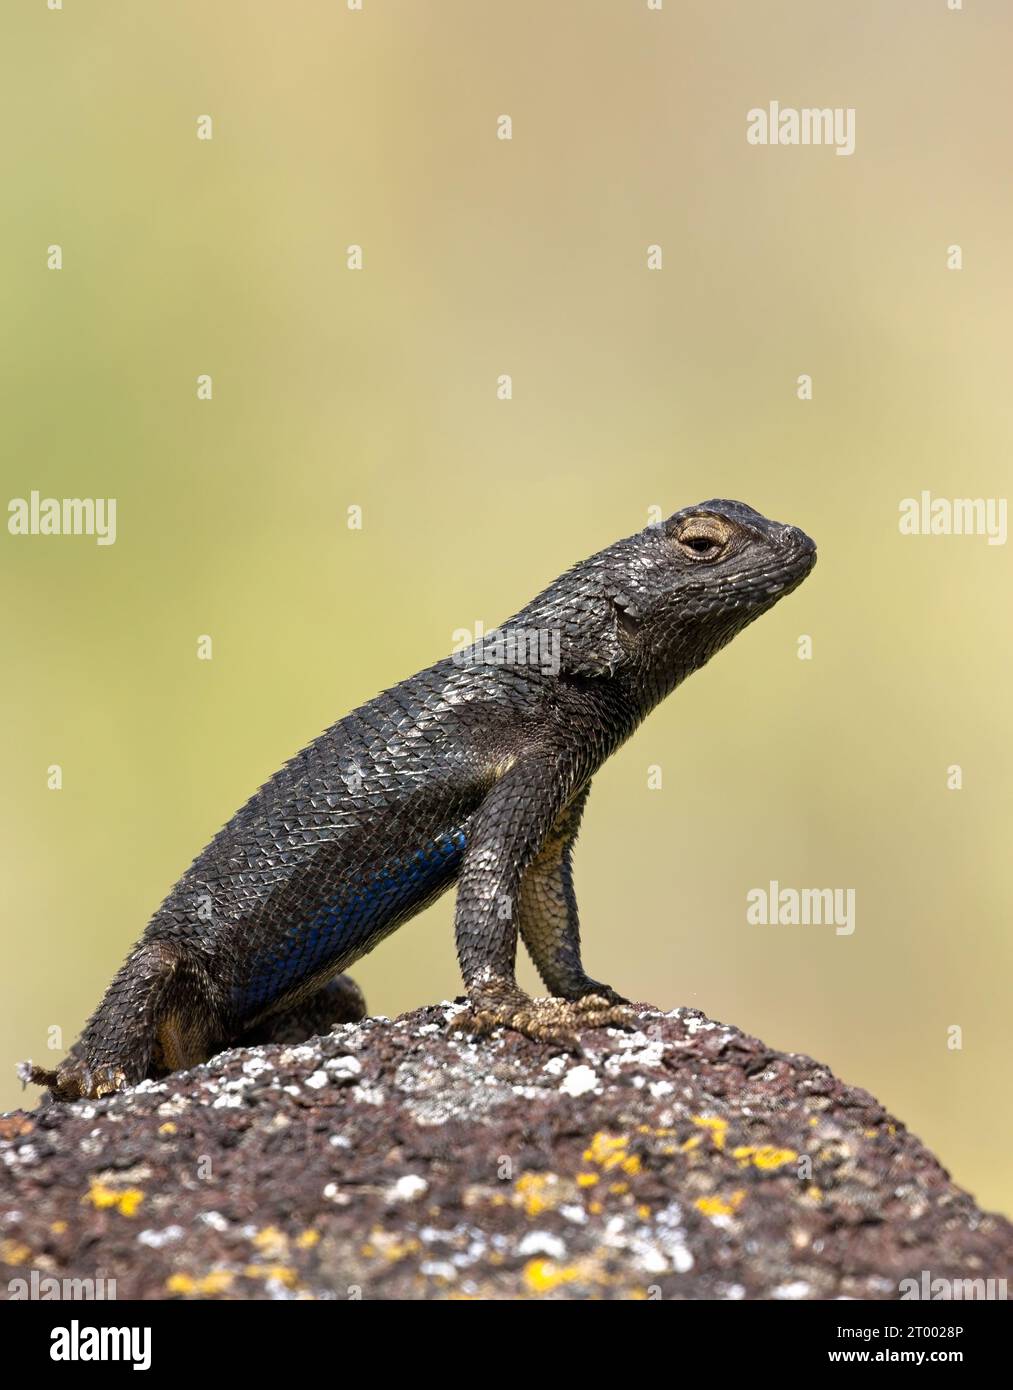 Close up of small lizard standing on a rock. Stock Photo